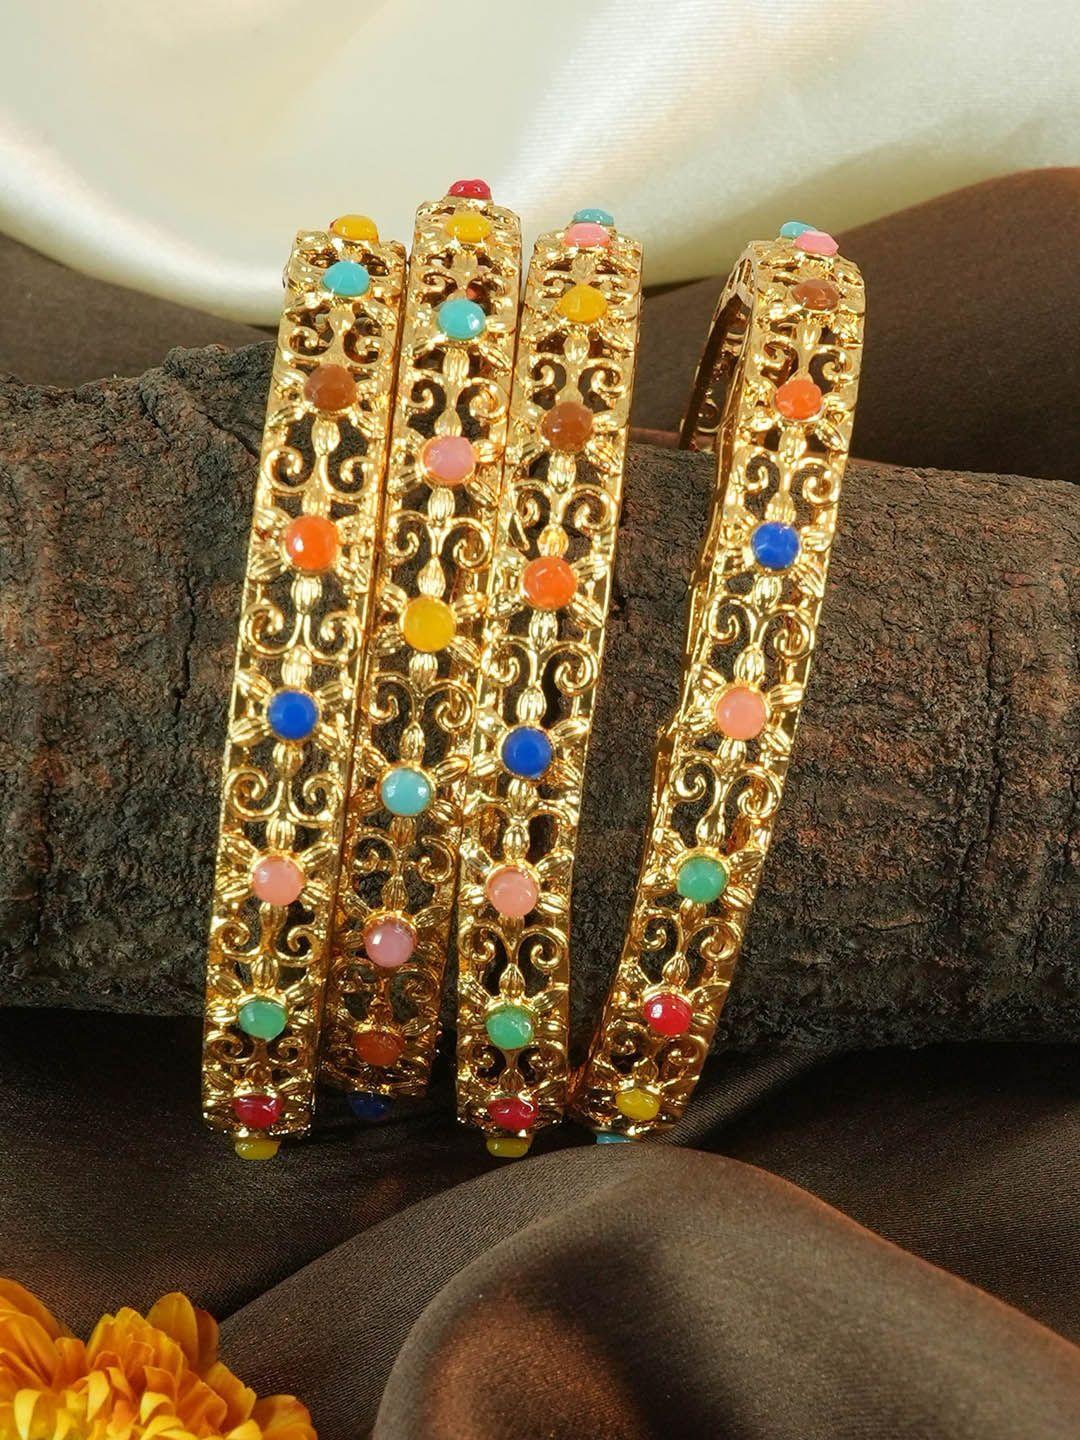 griiham set of 4 gold-plated ad-studded bangles